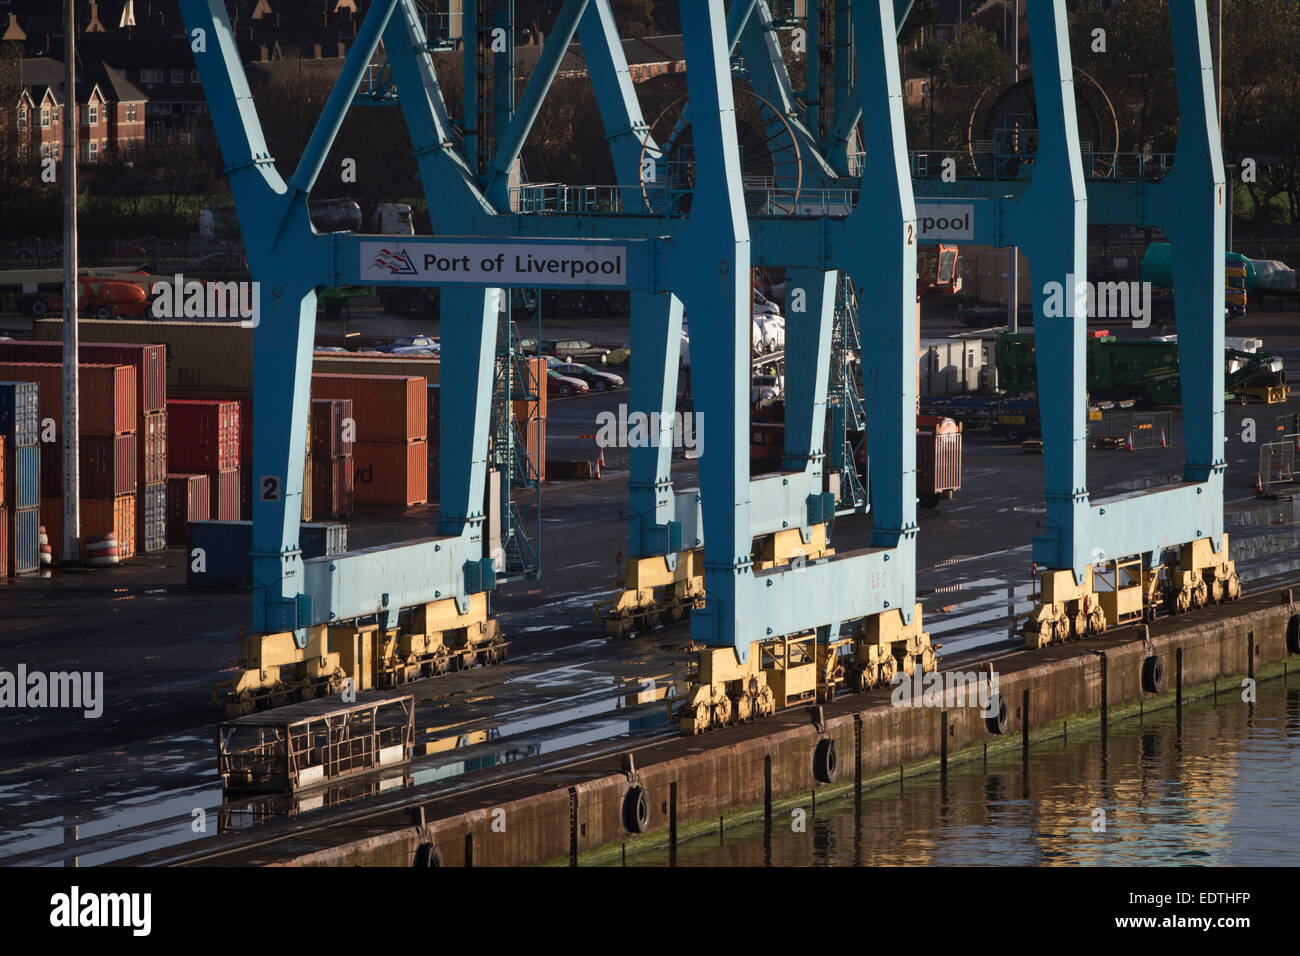 Cargo containers and a crane on the dock side at Seaforth Docks, Liverpool, England, UK. Stock Photo